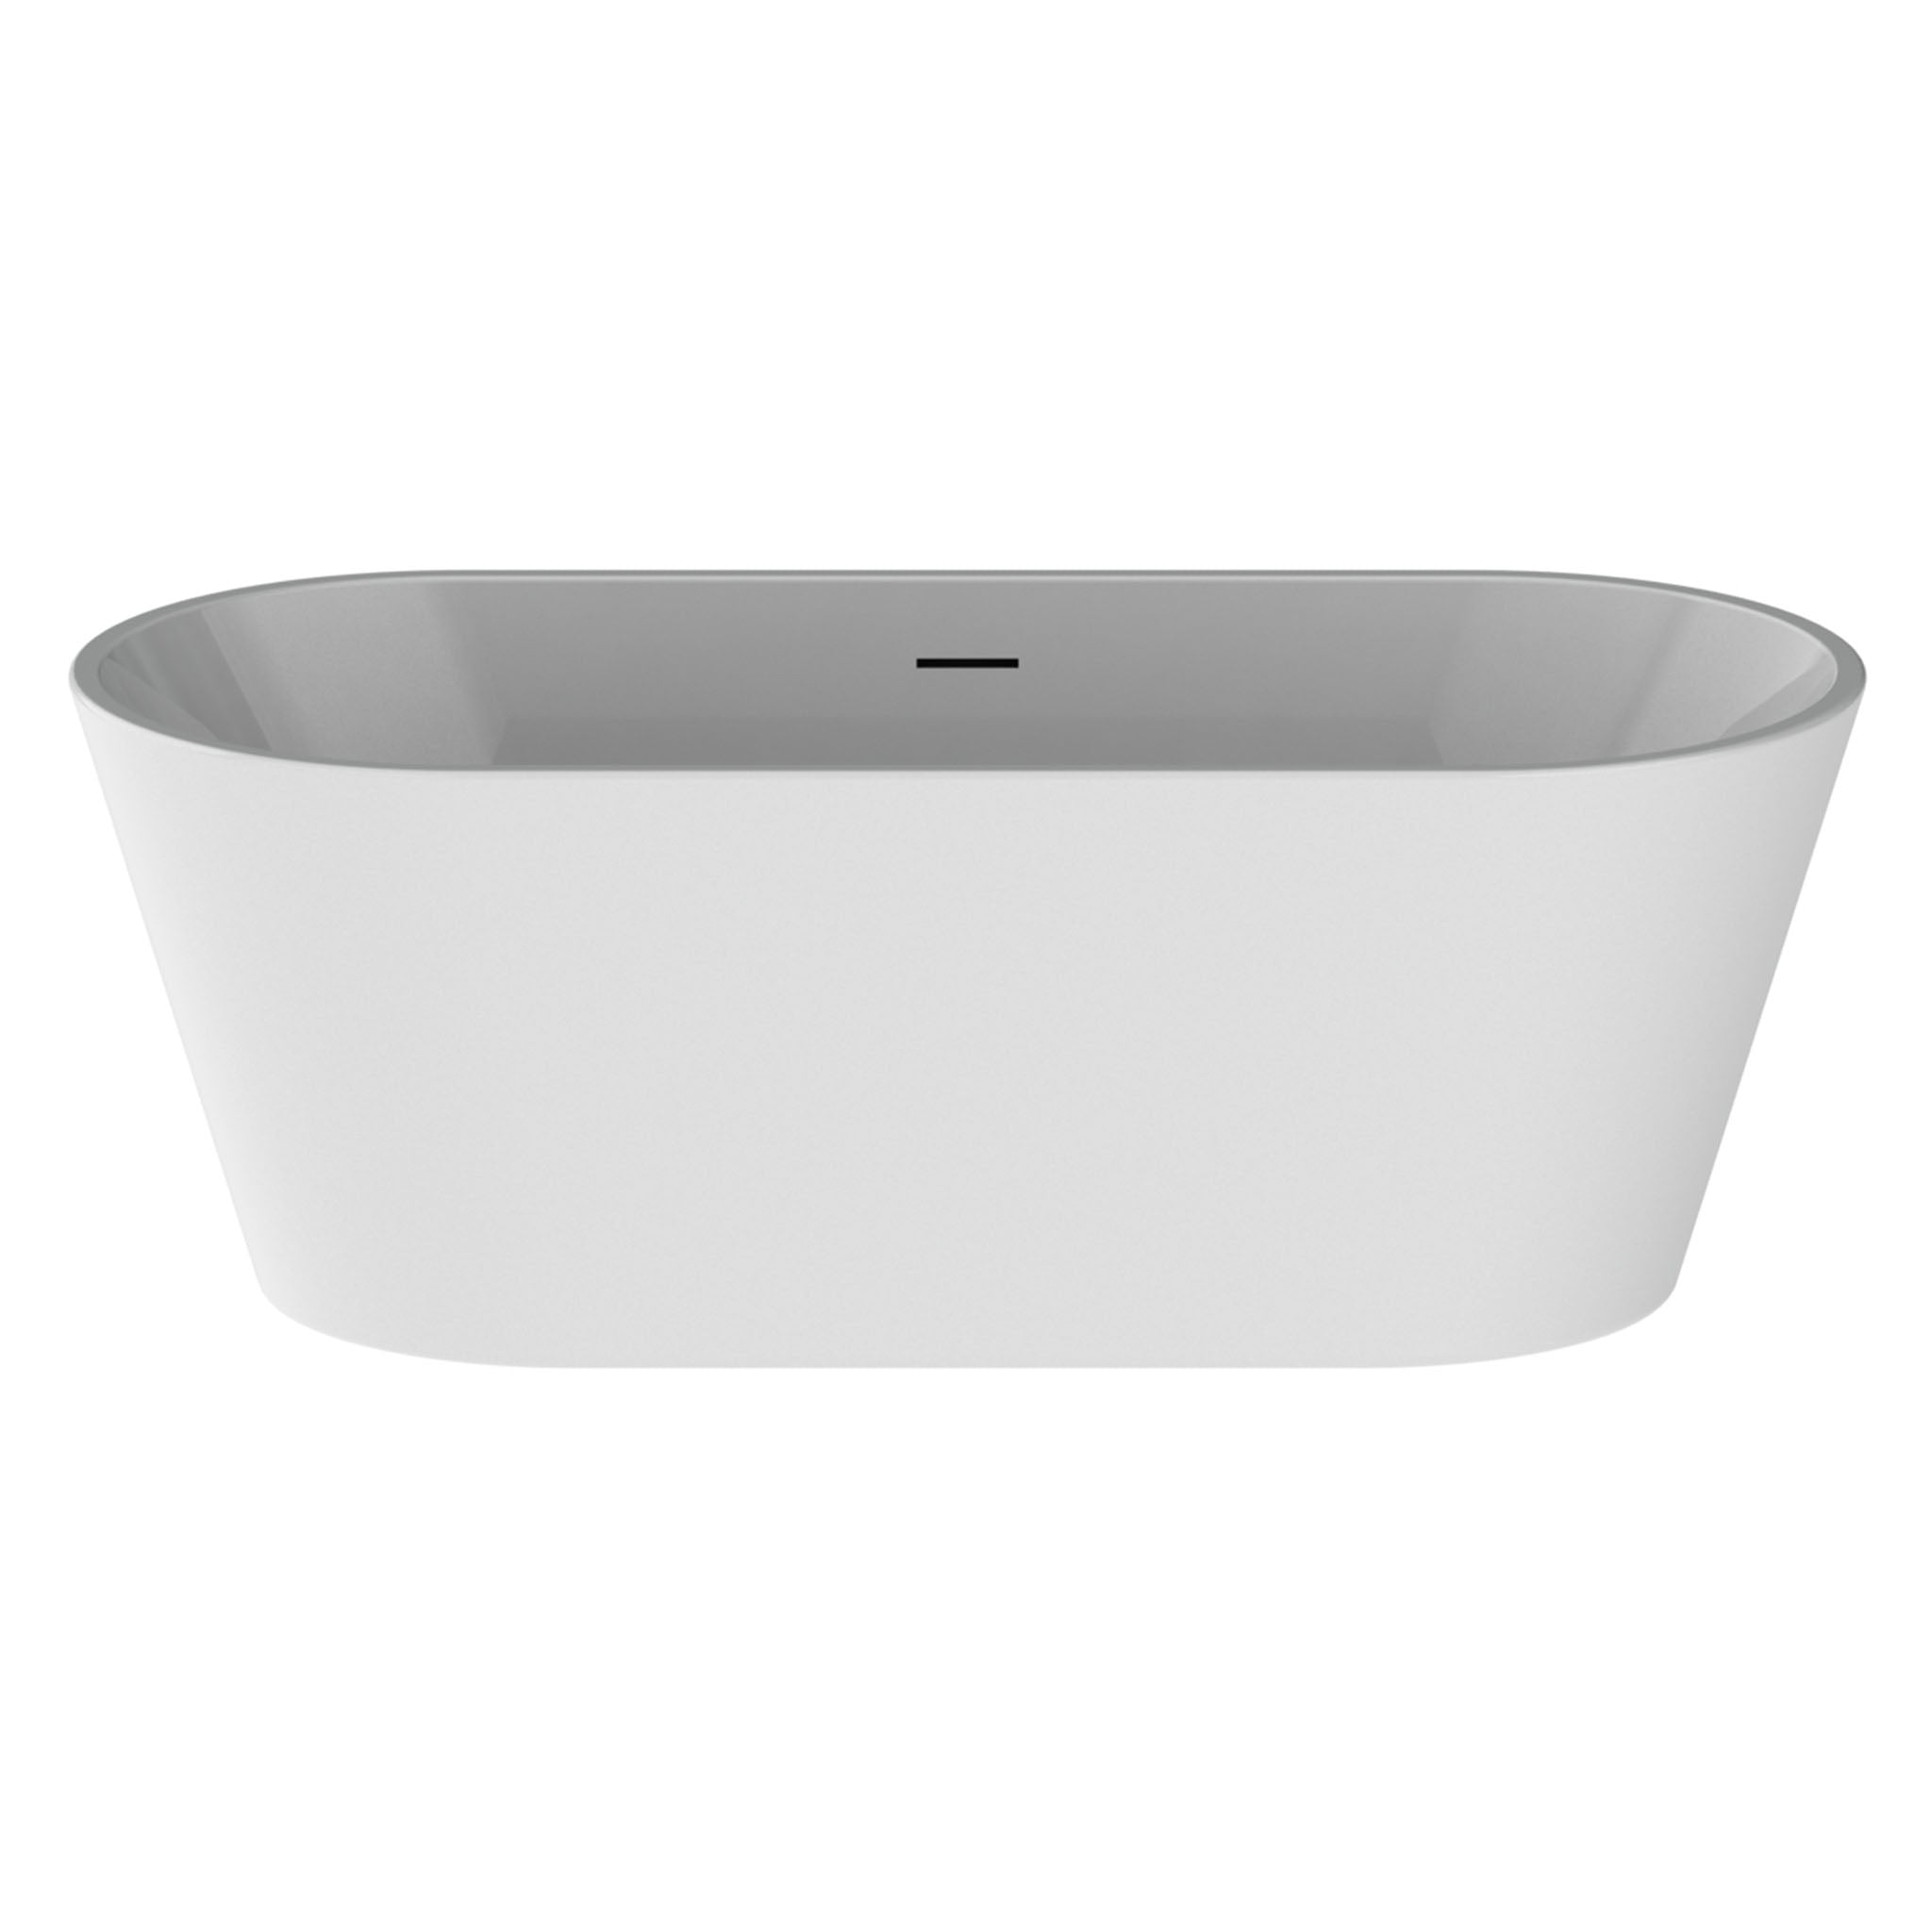 BC Designs Bletchley Double Ended Acrylic Seamless Bath